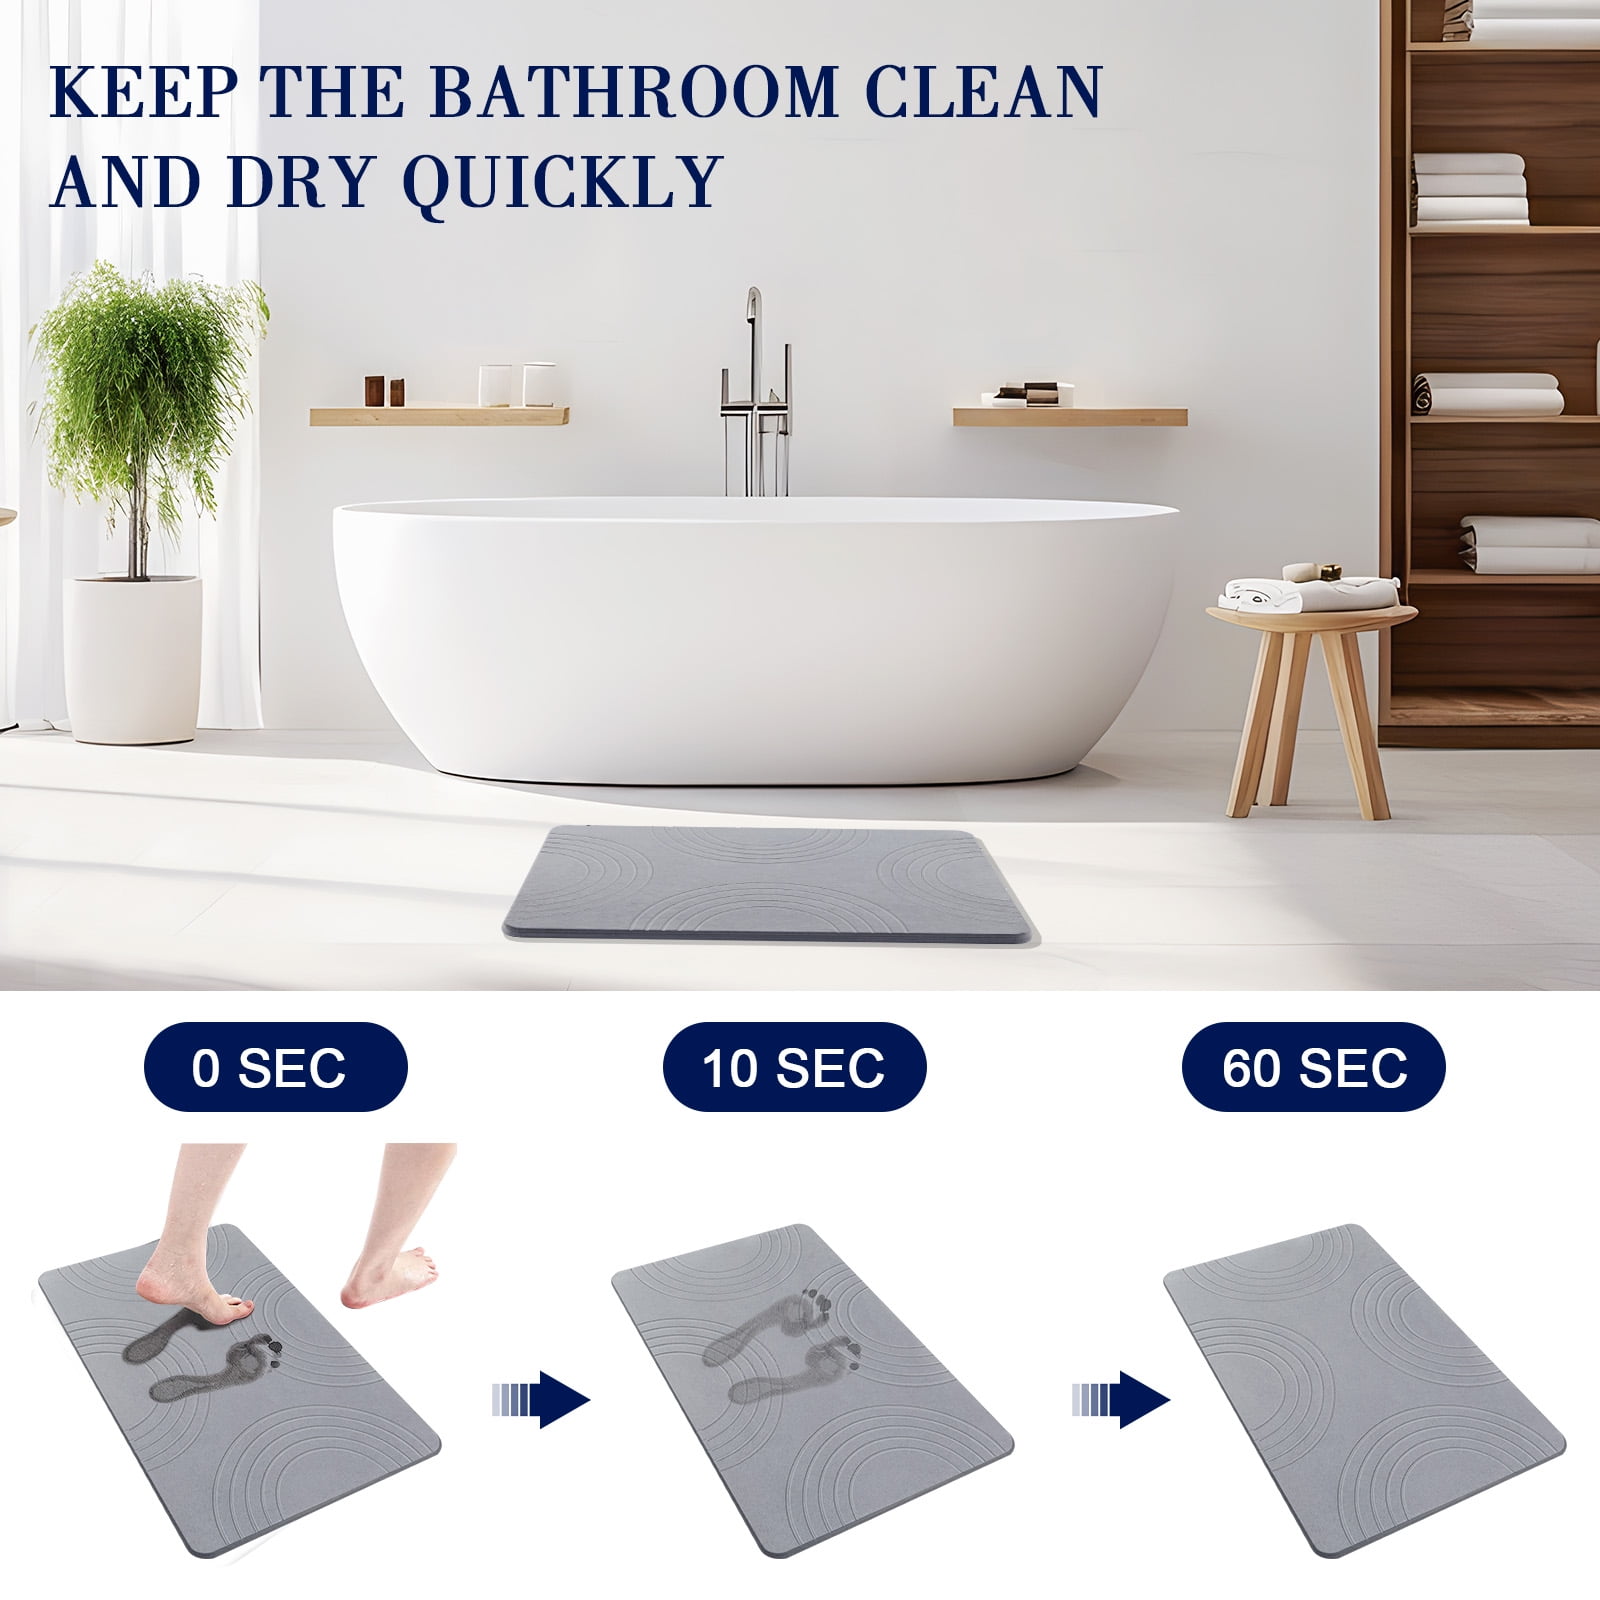 WANALIT Stone Bath Mat, Quick Drying Diatomaceous Earth Shower Mat with  NON-Slip Pad, Super Absorbent Bathroom Floor Mat for Kitchen Counter, Sink,  Natural Easy to Clean-23.6x 15.5 